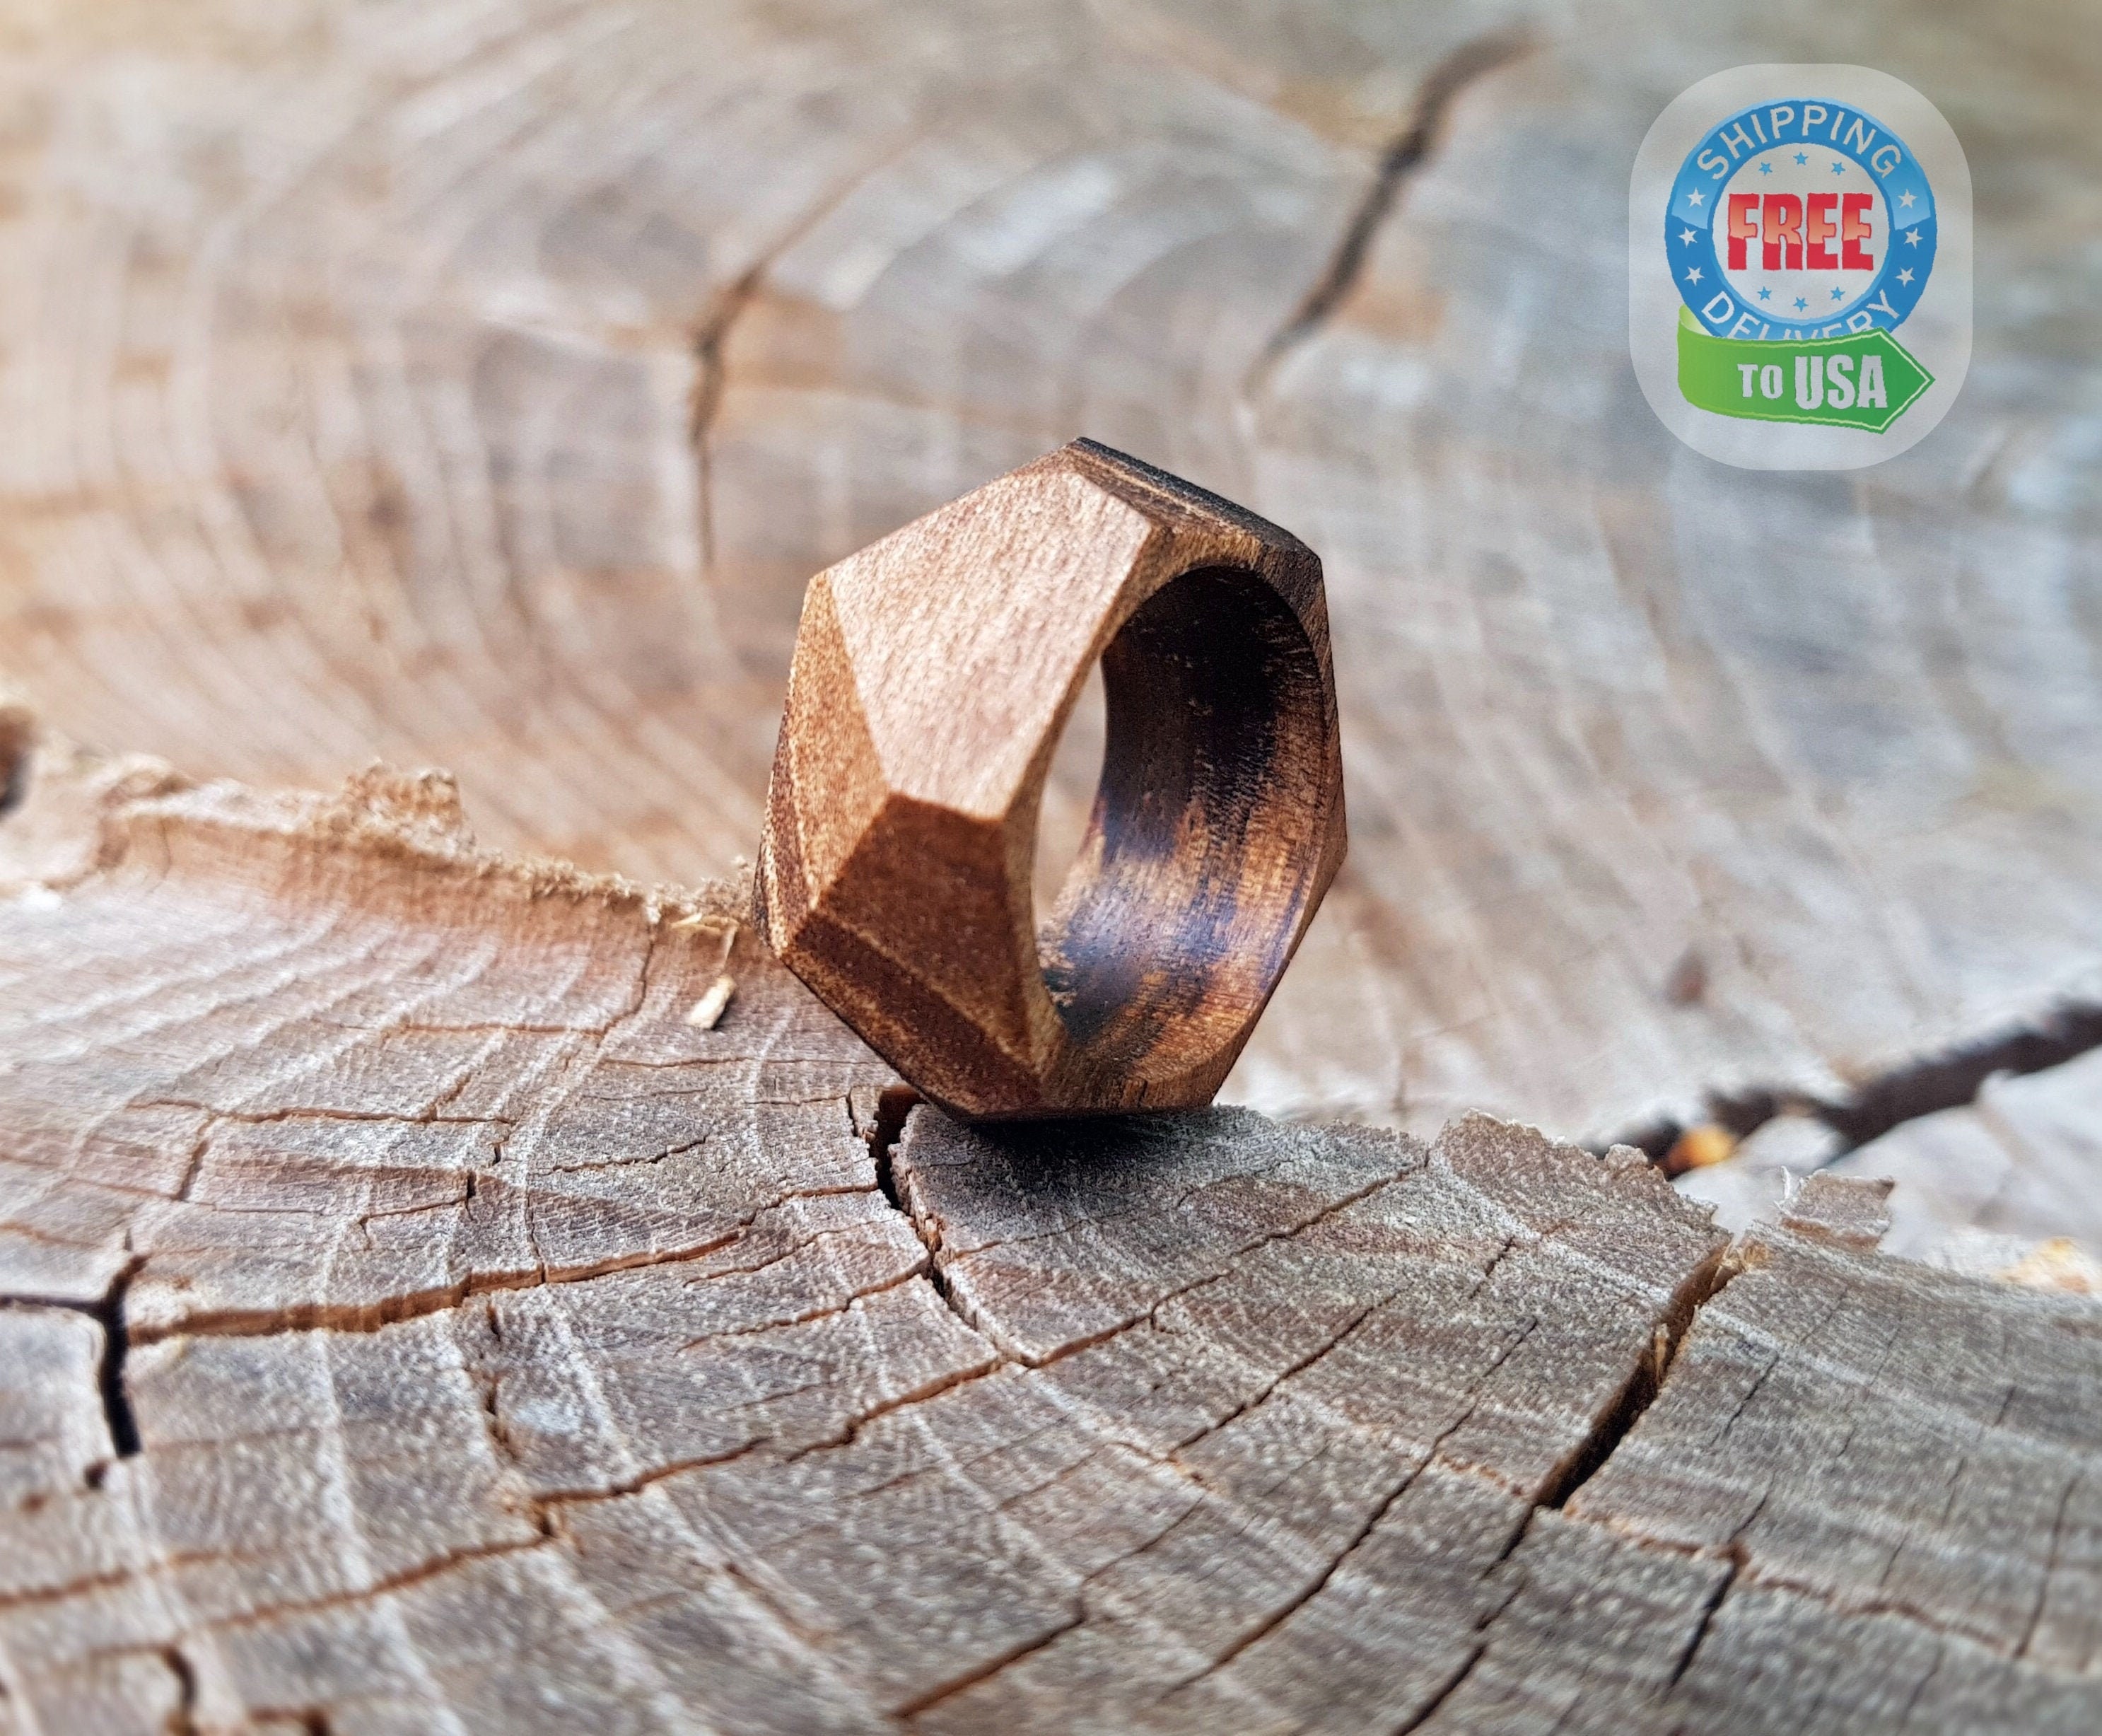 Wooden Ring Handmade From Walnut Wood Unisex 3mm, Bentwood. 